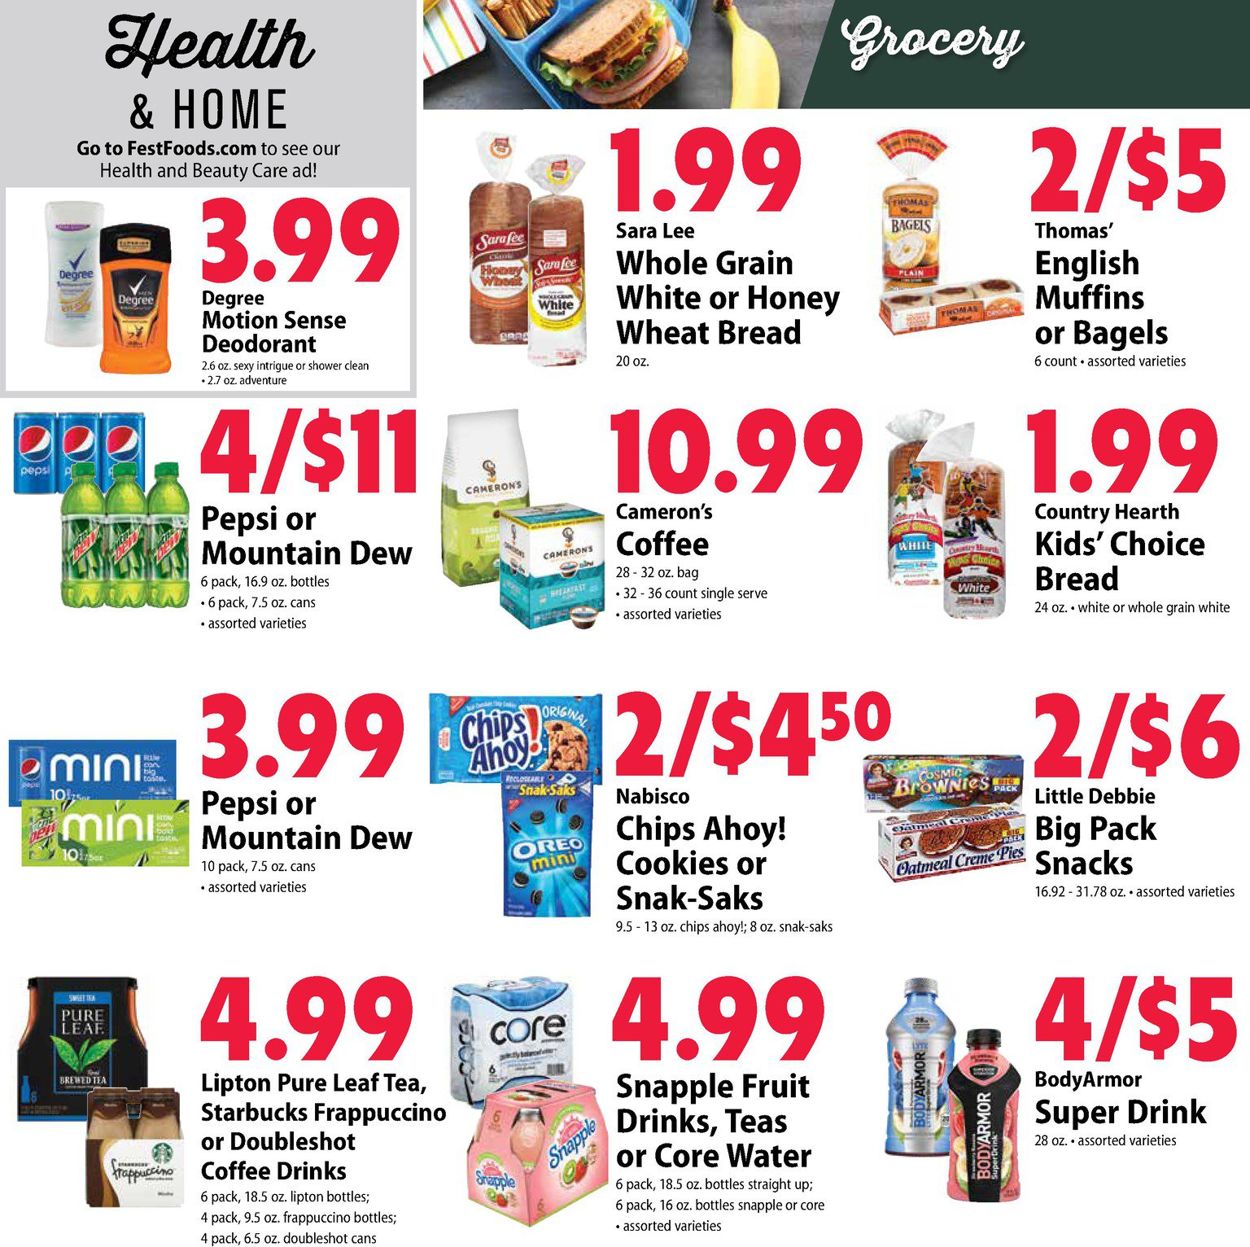 Festival Foods Current weekly ad 09/04 - 09/10/2019 [7] - frequent-ads.com